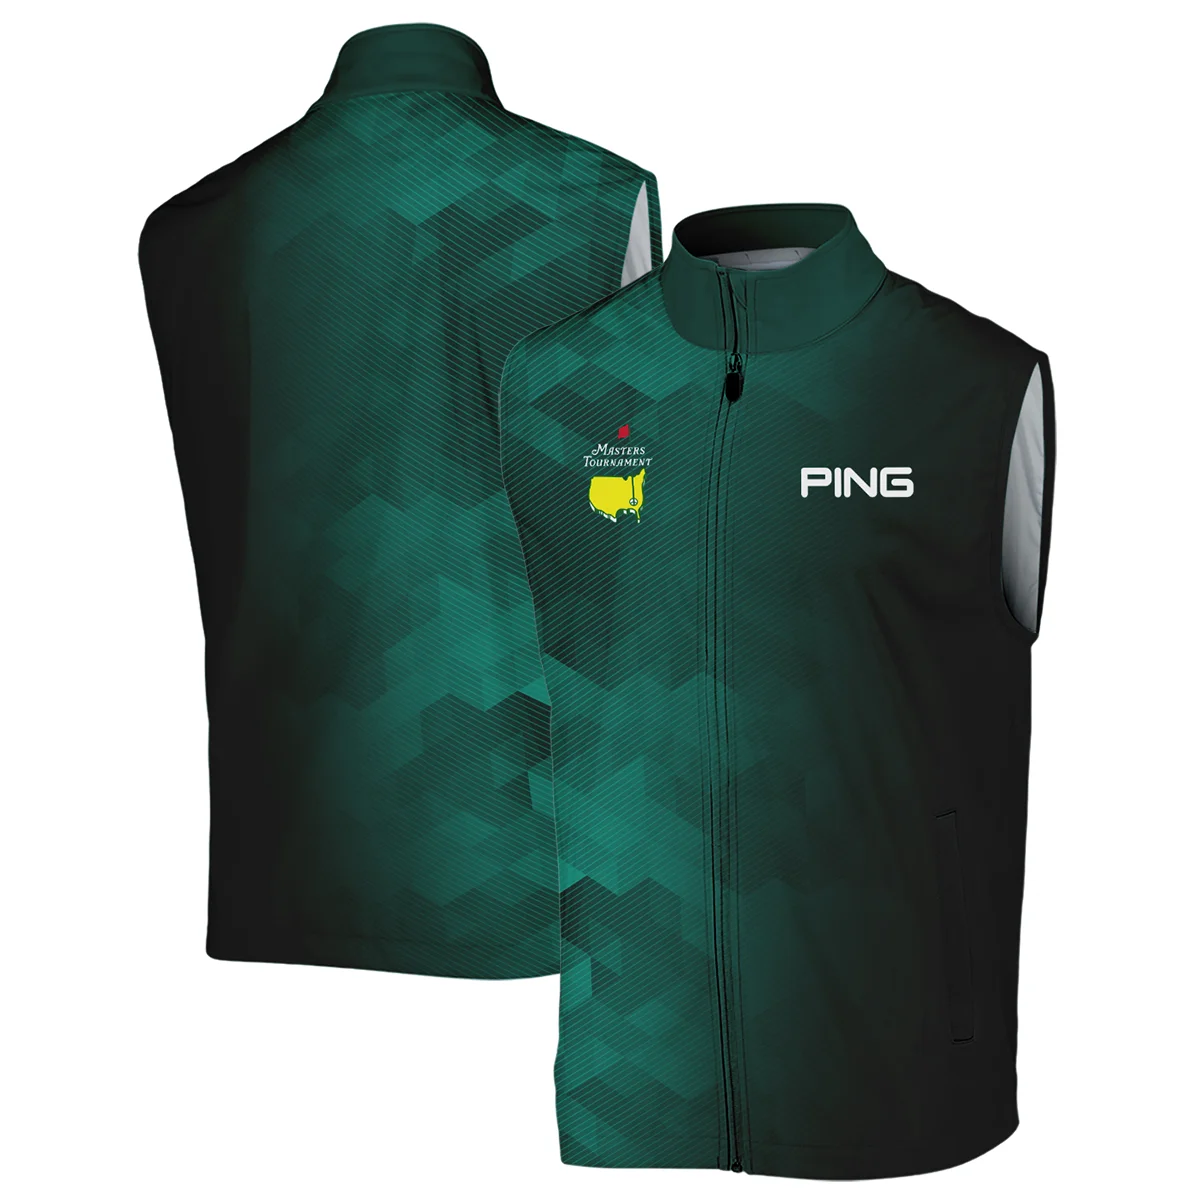 Ping Golf Sport Dark Green Gradient Abstract Background Masters Tournament Sleeveless Jacket Style Classic Sleeveless Jacket